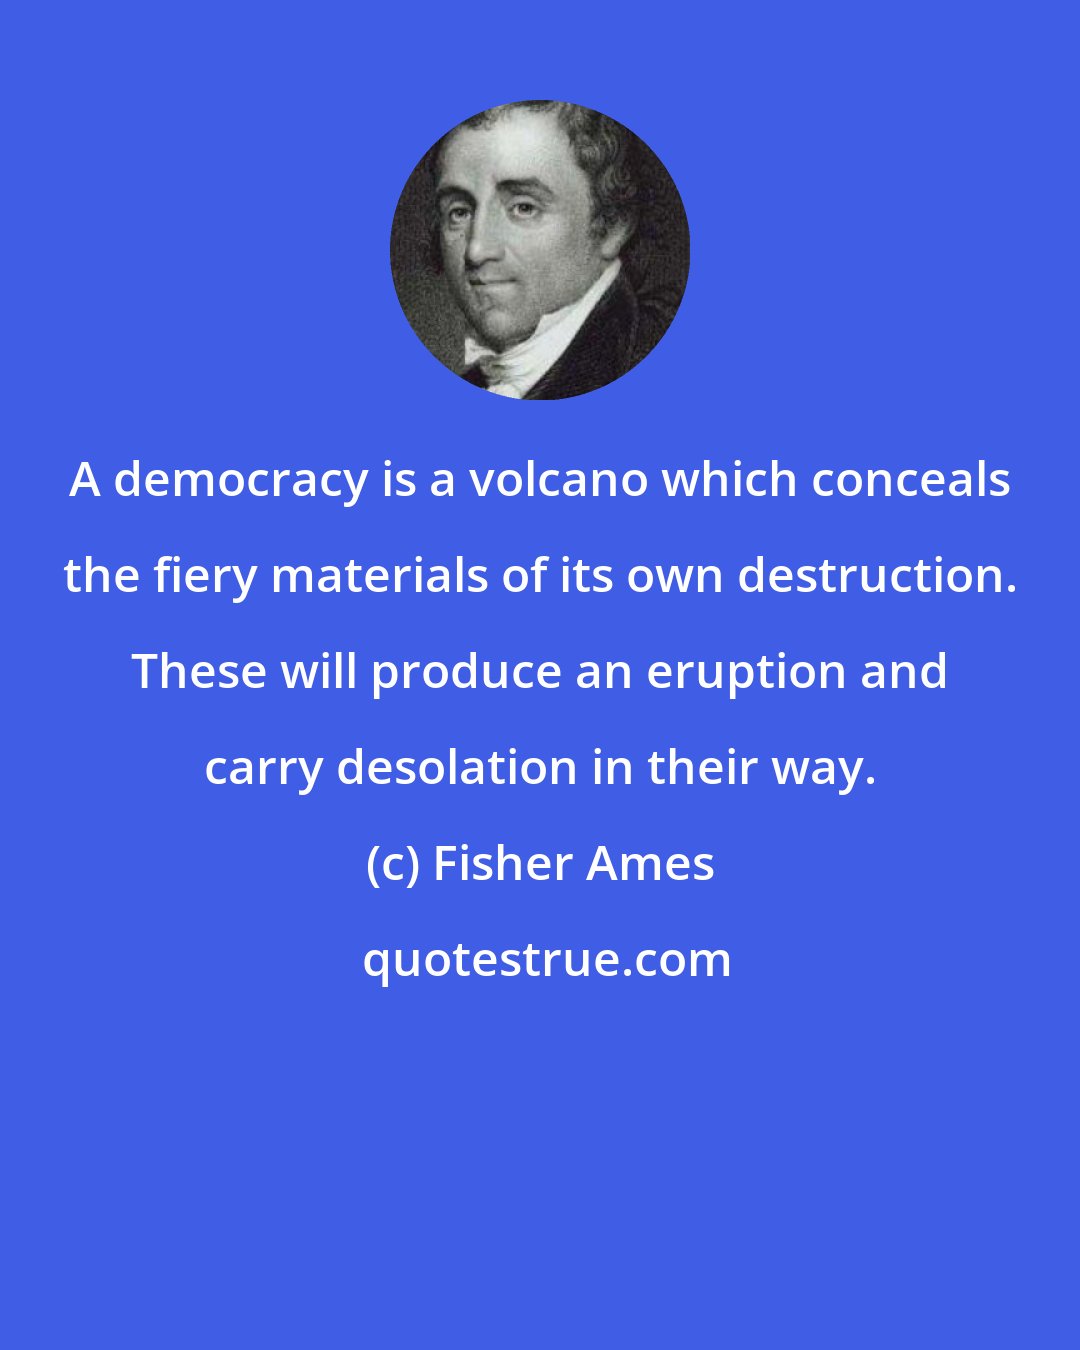 Fisher Ames: A democracy is a volcano which conceals the fiery materials of its own destruction. These will produce an eruption and carry desolation in their way.